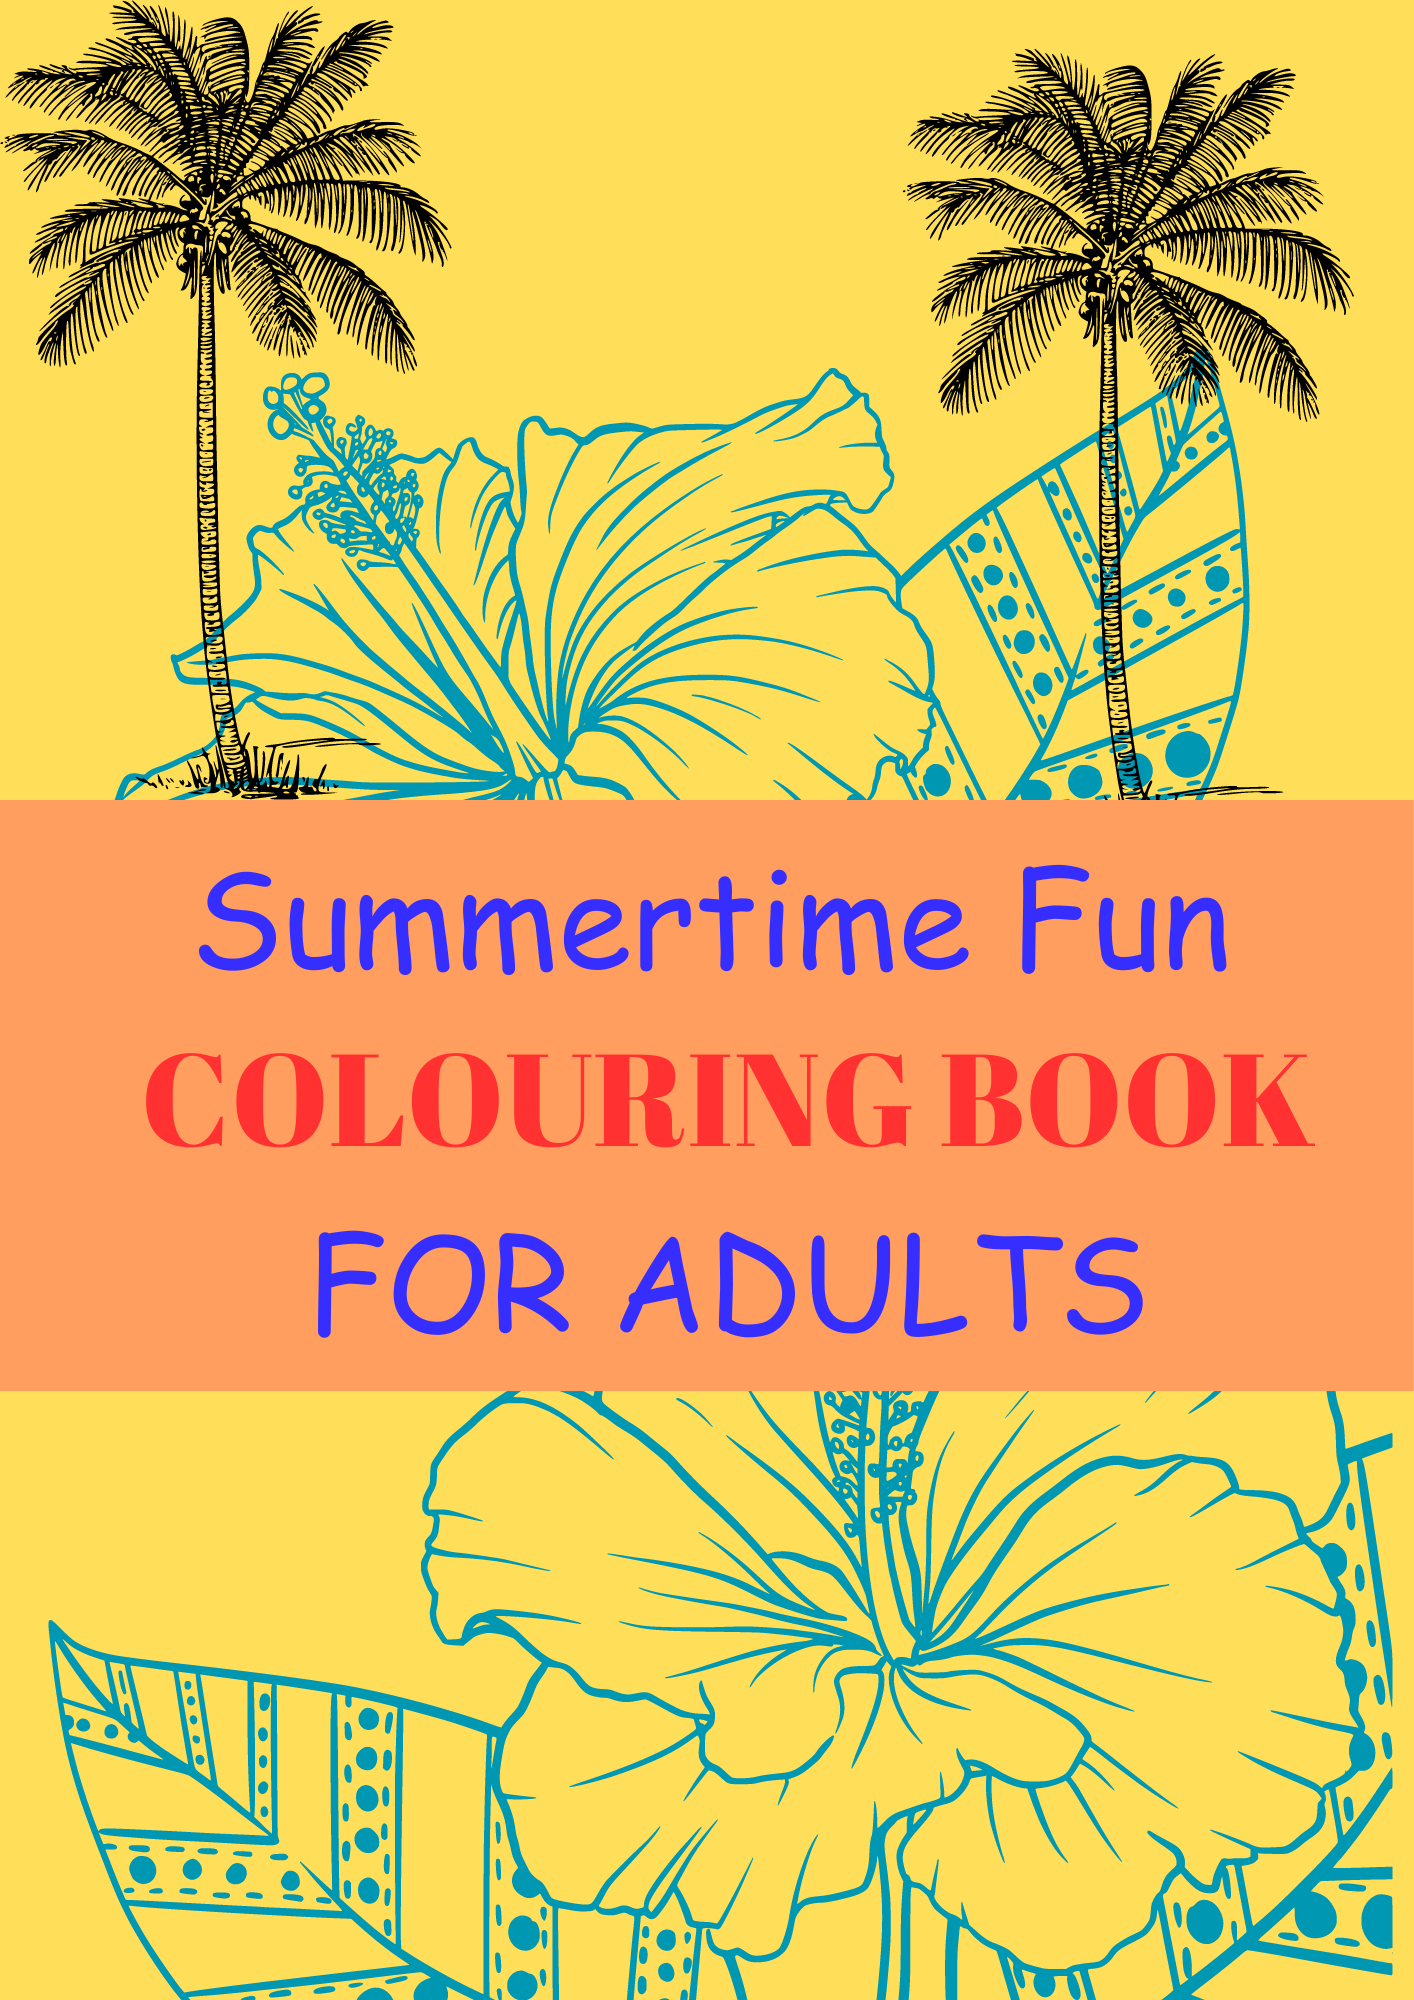 Summertime Fun Adult Colouring Book